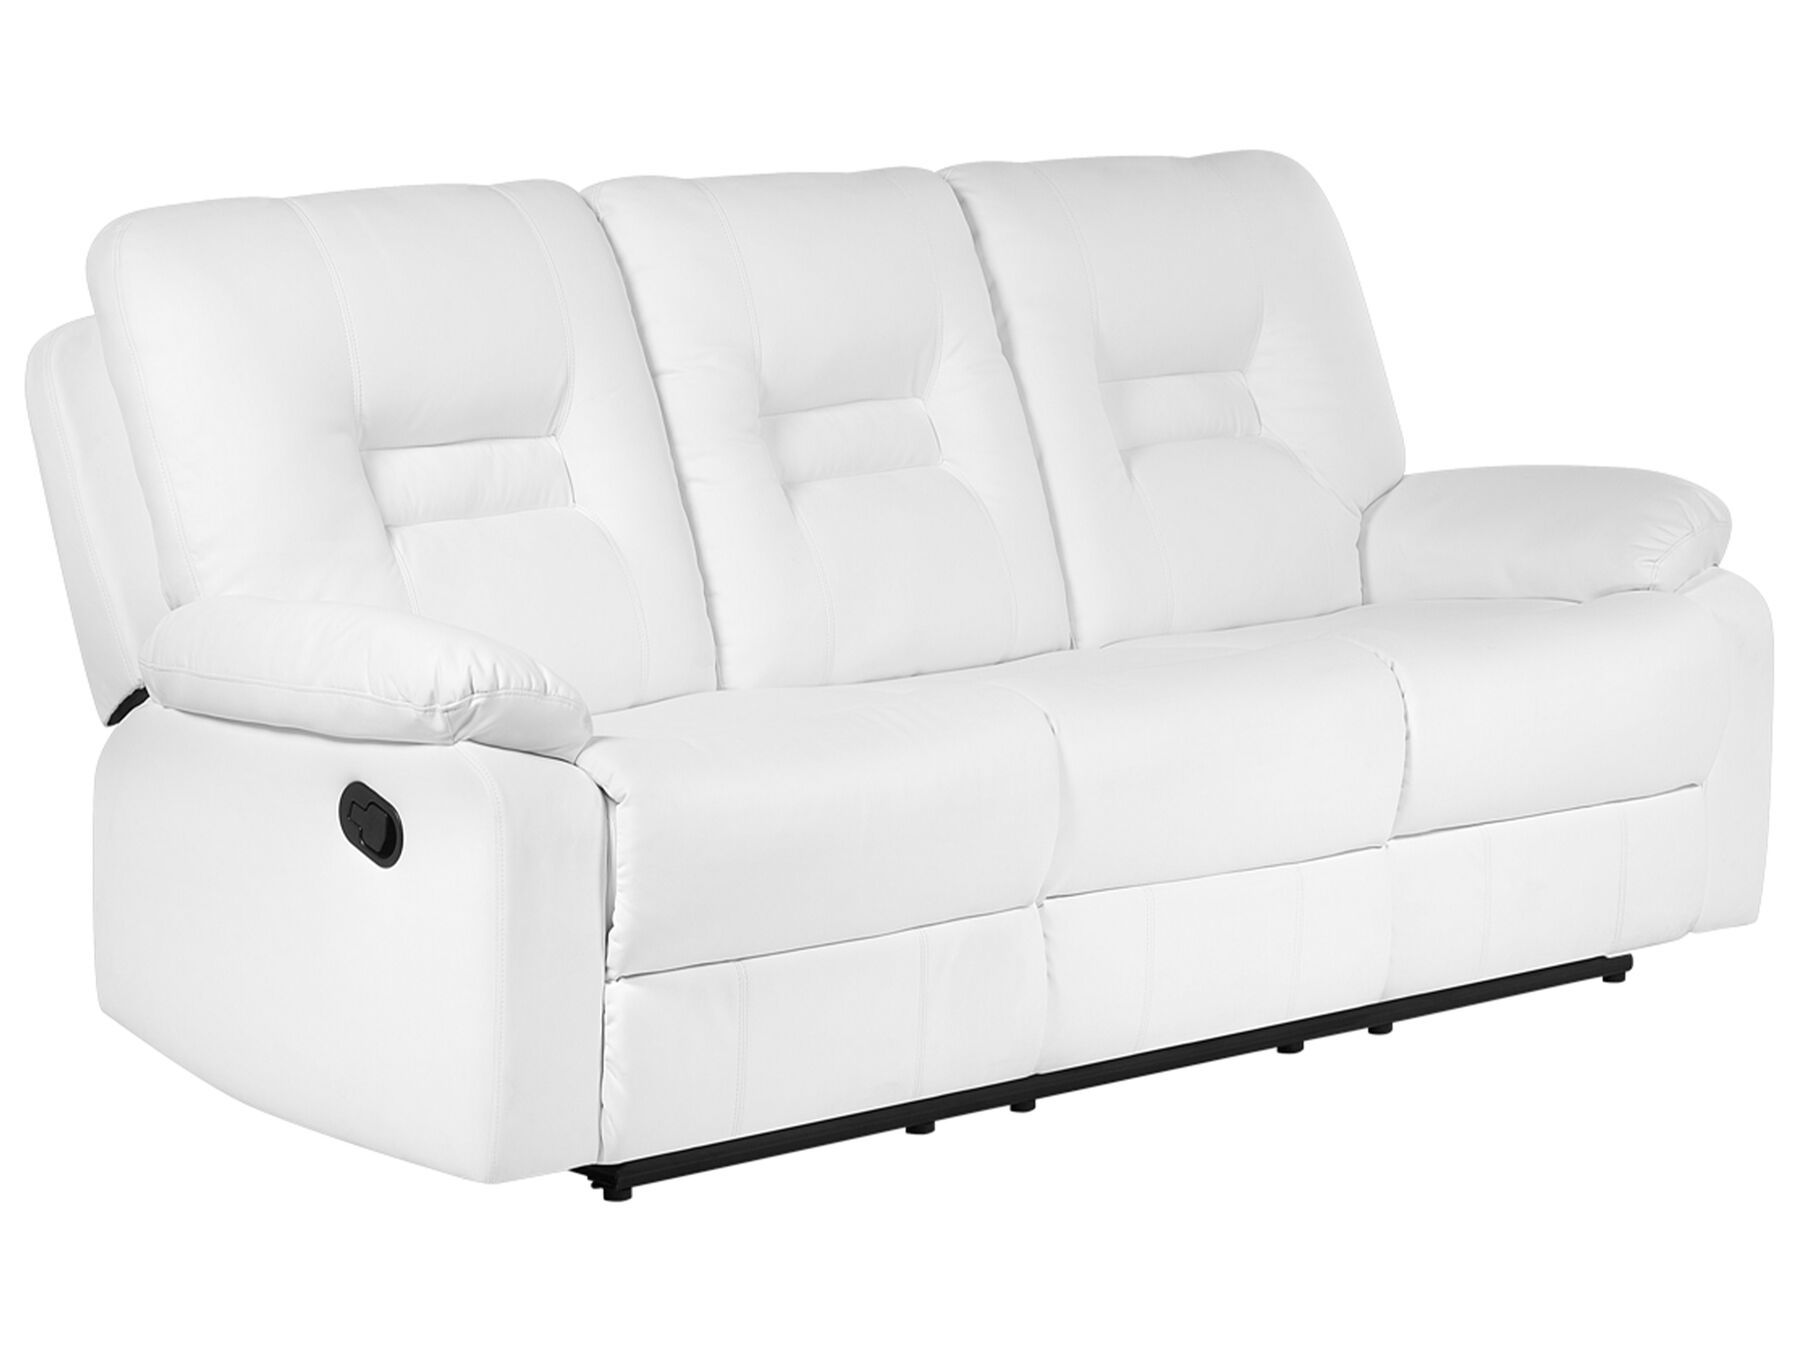 3 Seater Faux Leather Recliner Sofa White Bergen | Beliani.dk With Regard To Traditional 3 Seater Faux Leather Sofas (Gallery 20 of 20)